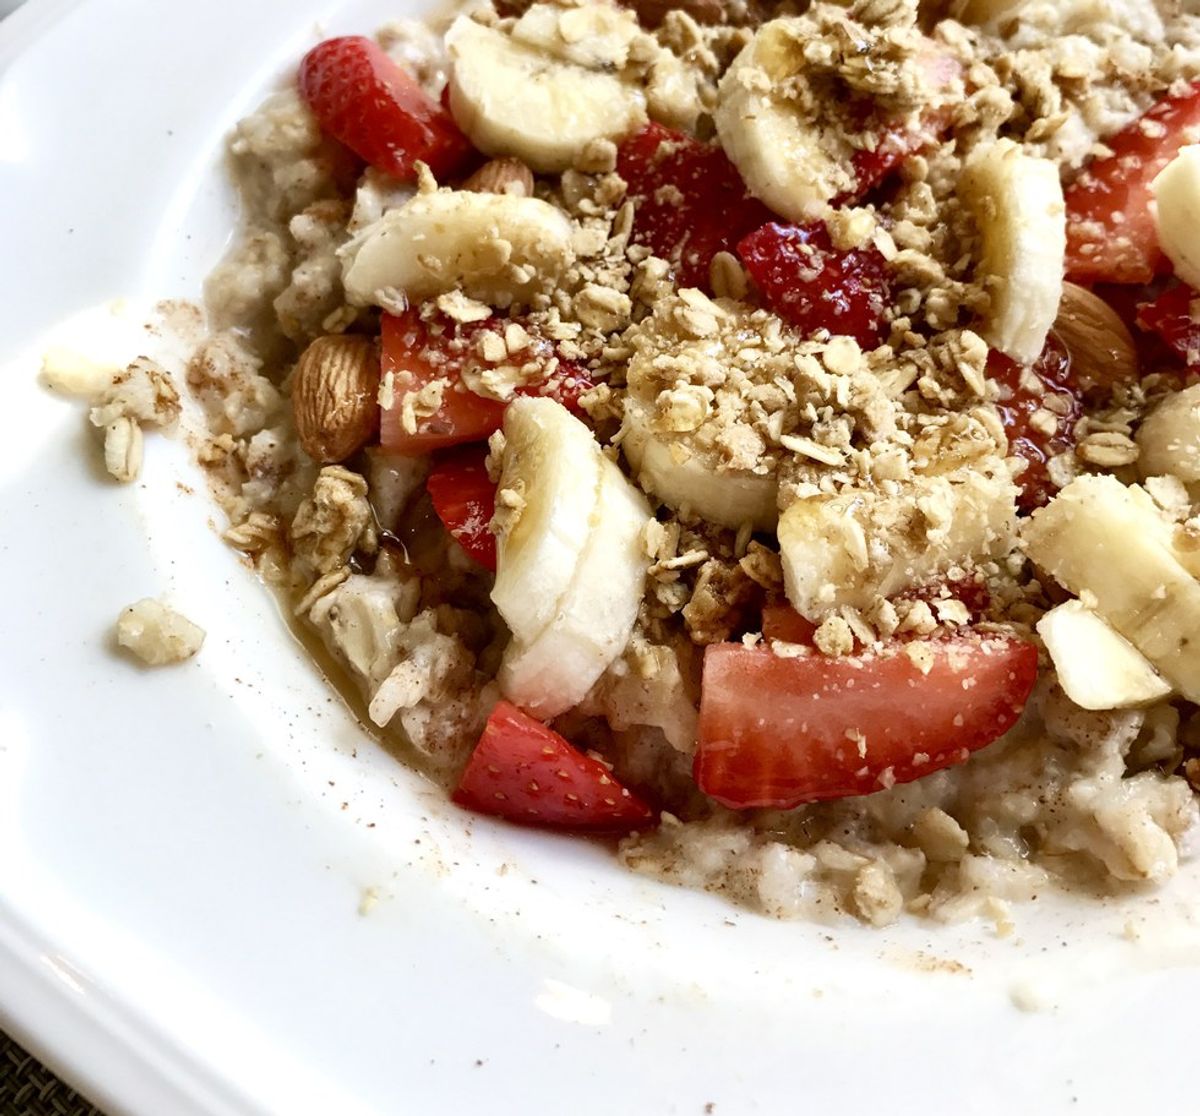 How To Make A Strawberry And Banana Protein Bowl